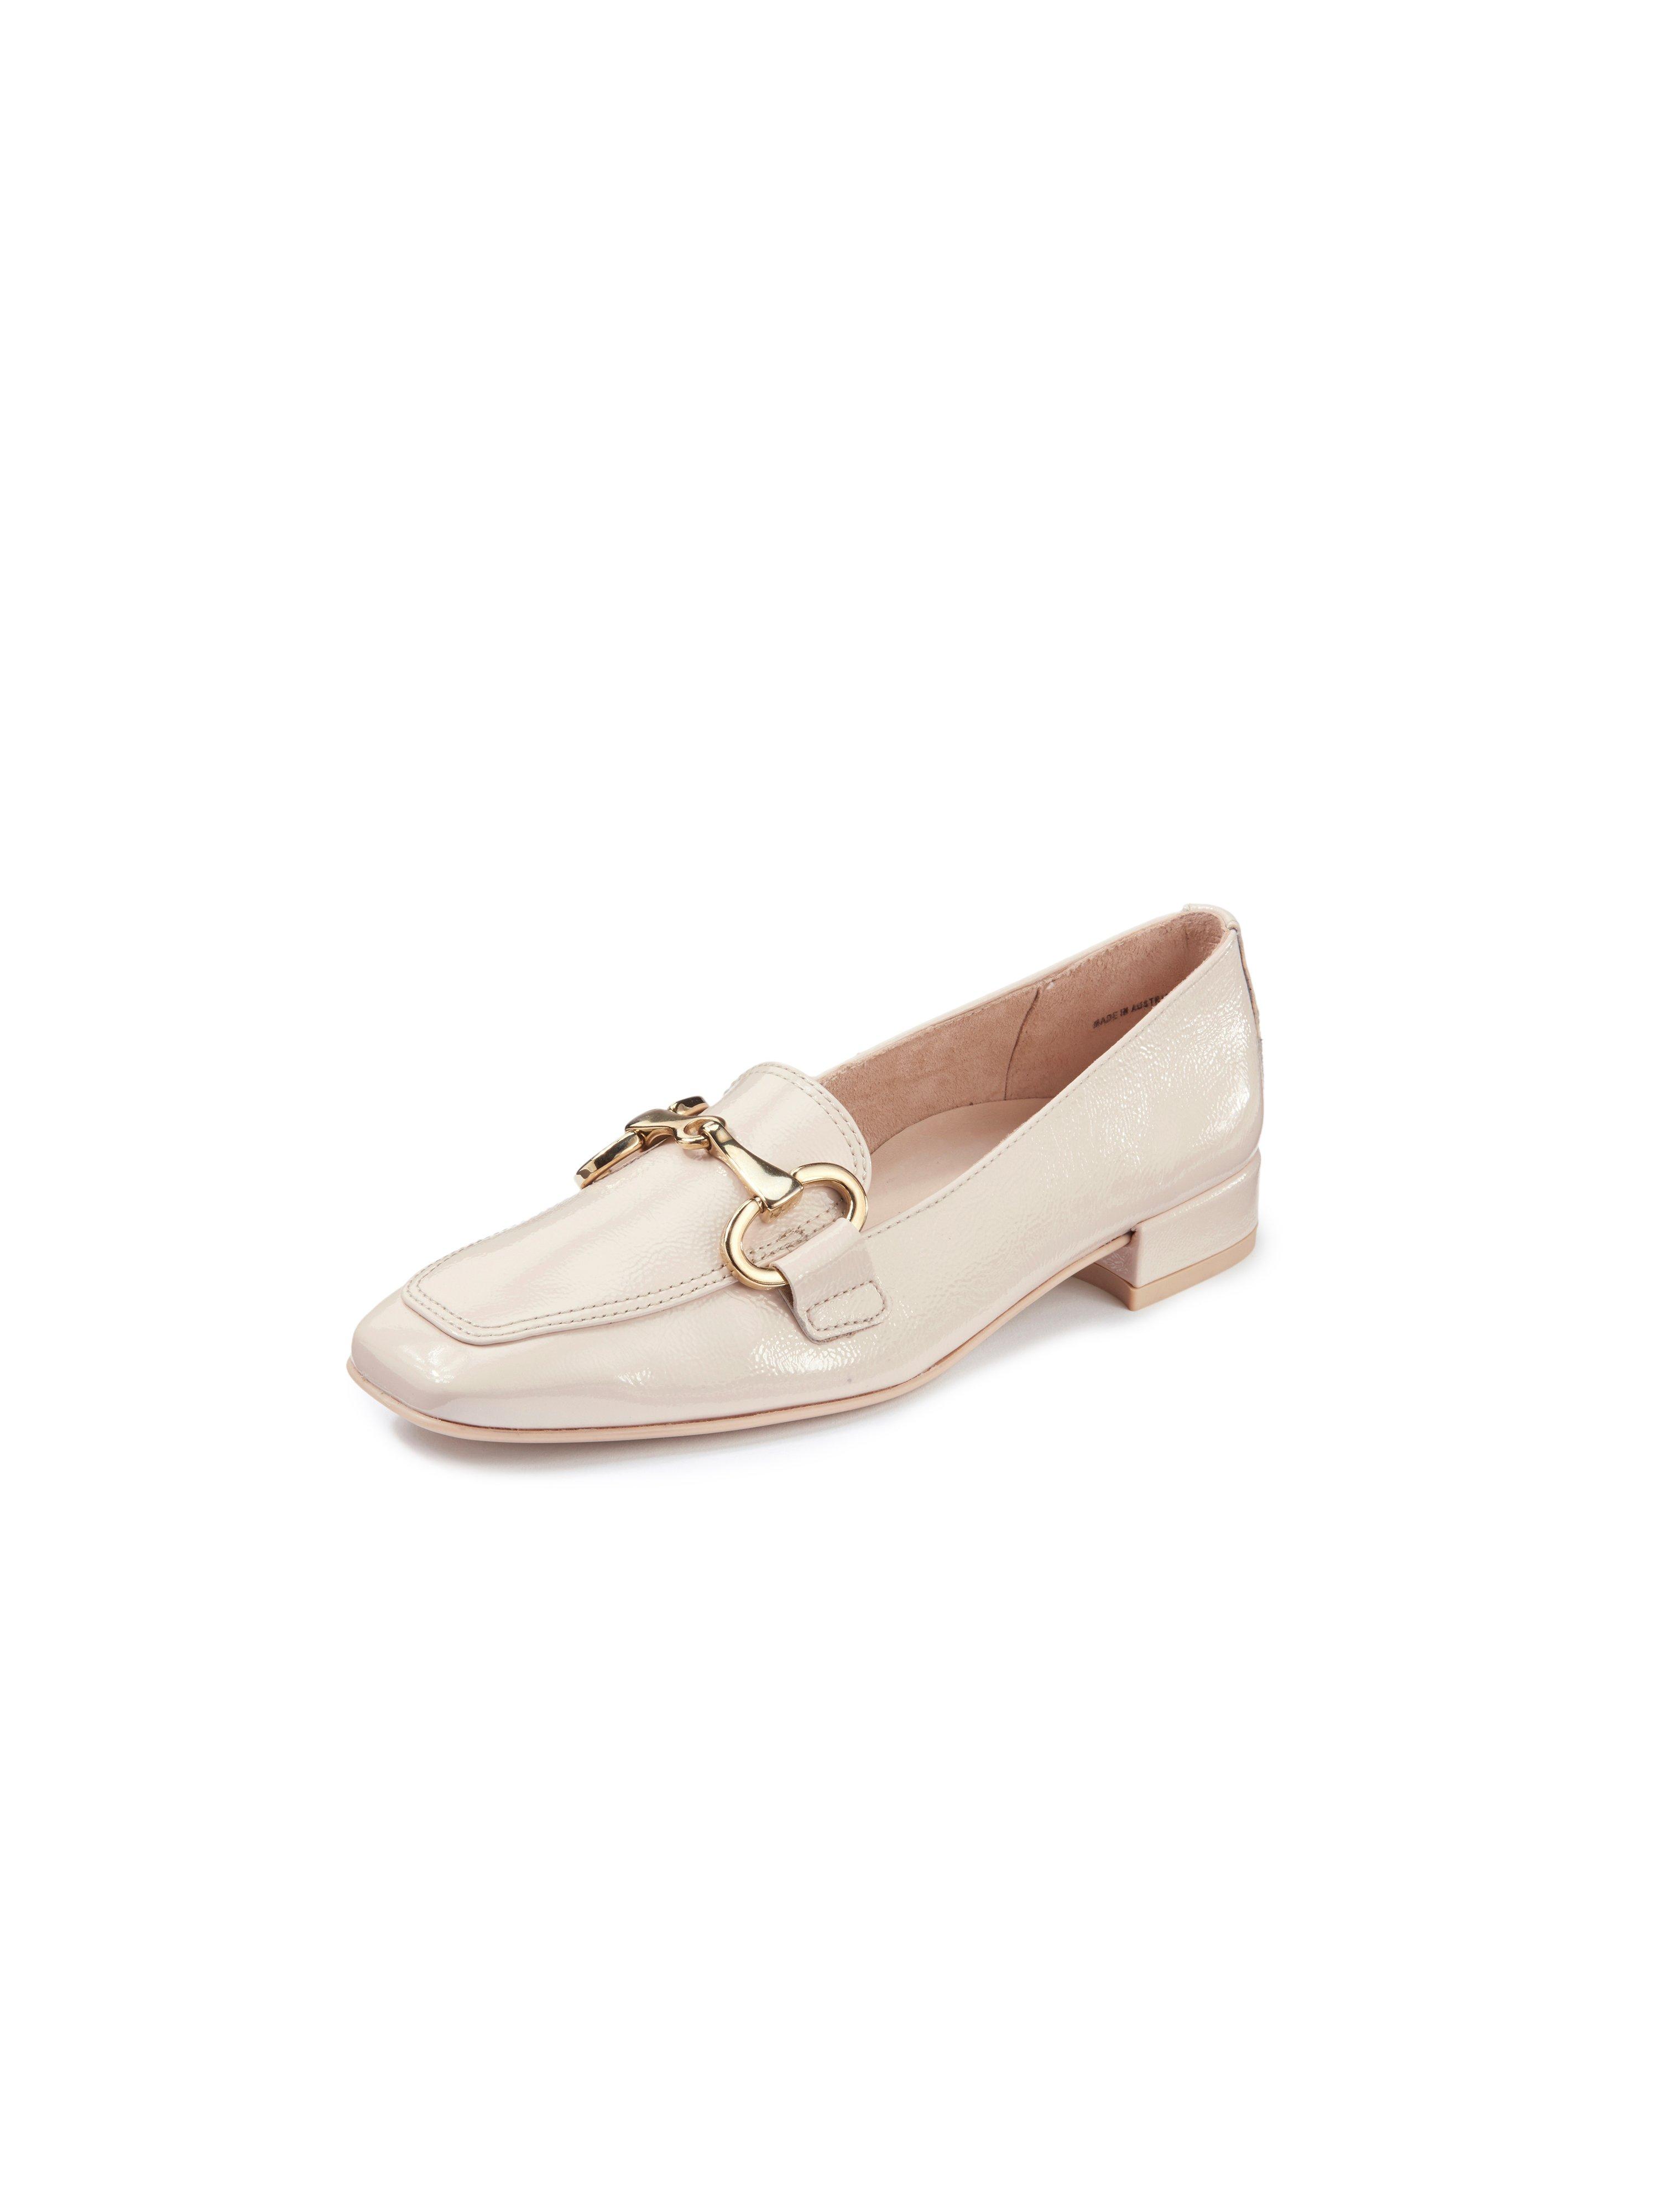 Loafers made of creased patent leather Paul Green beige